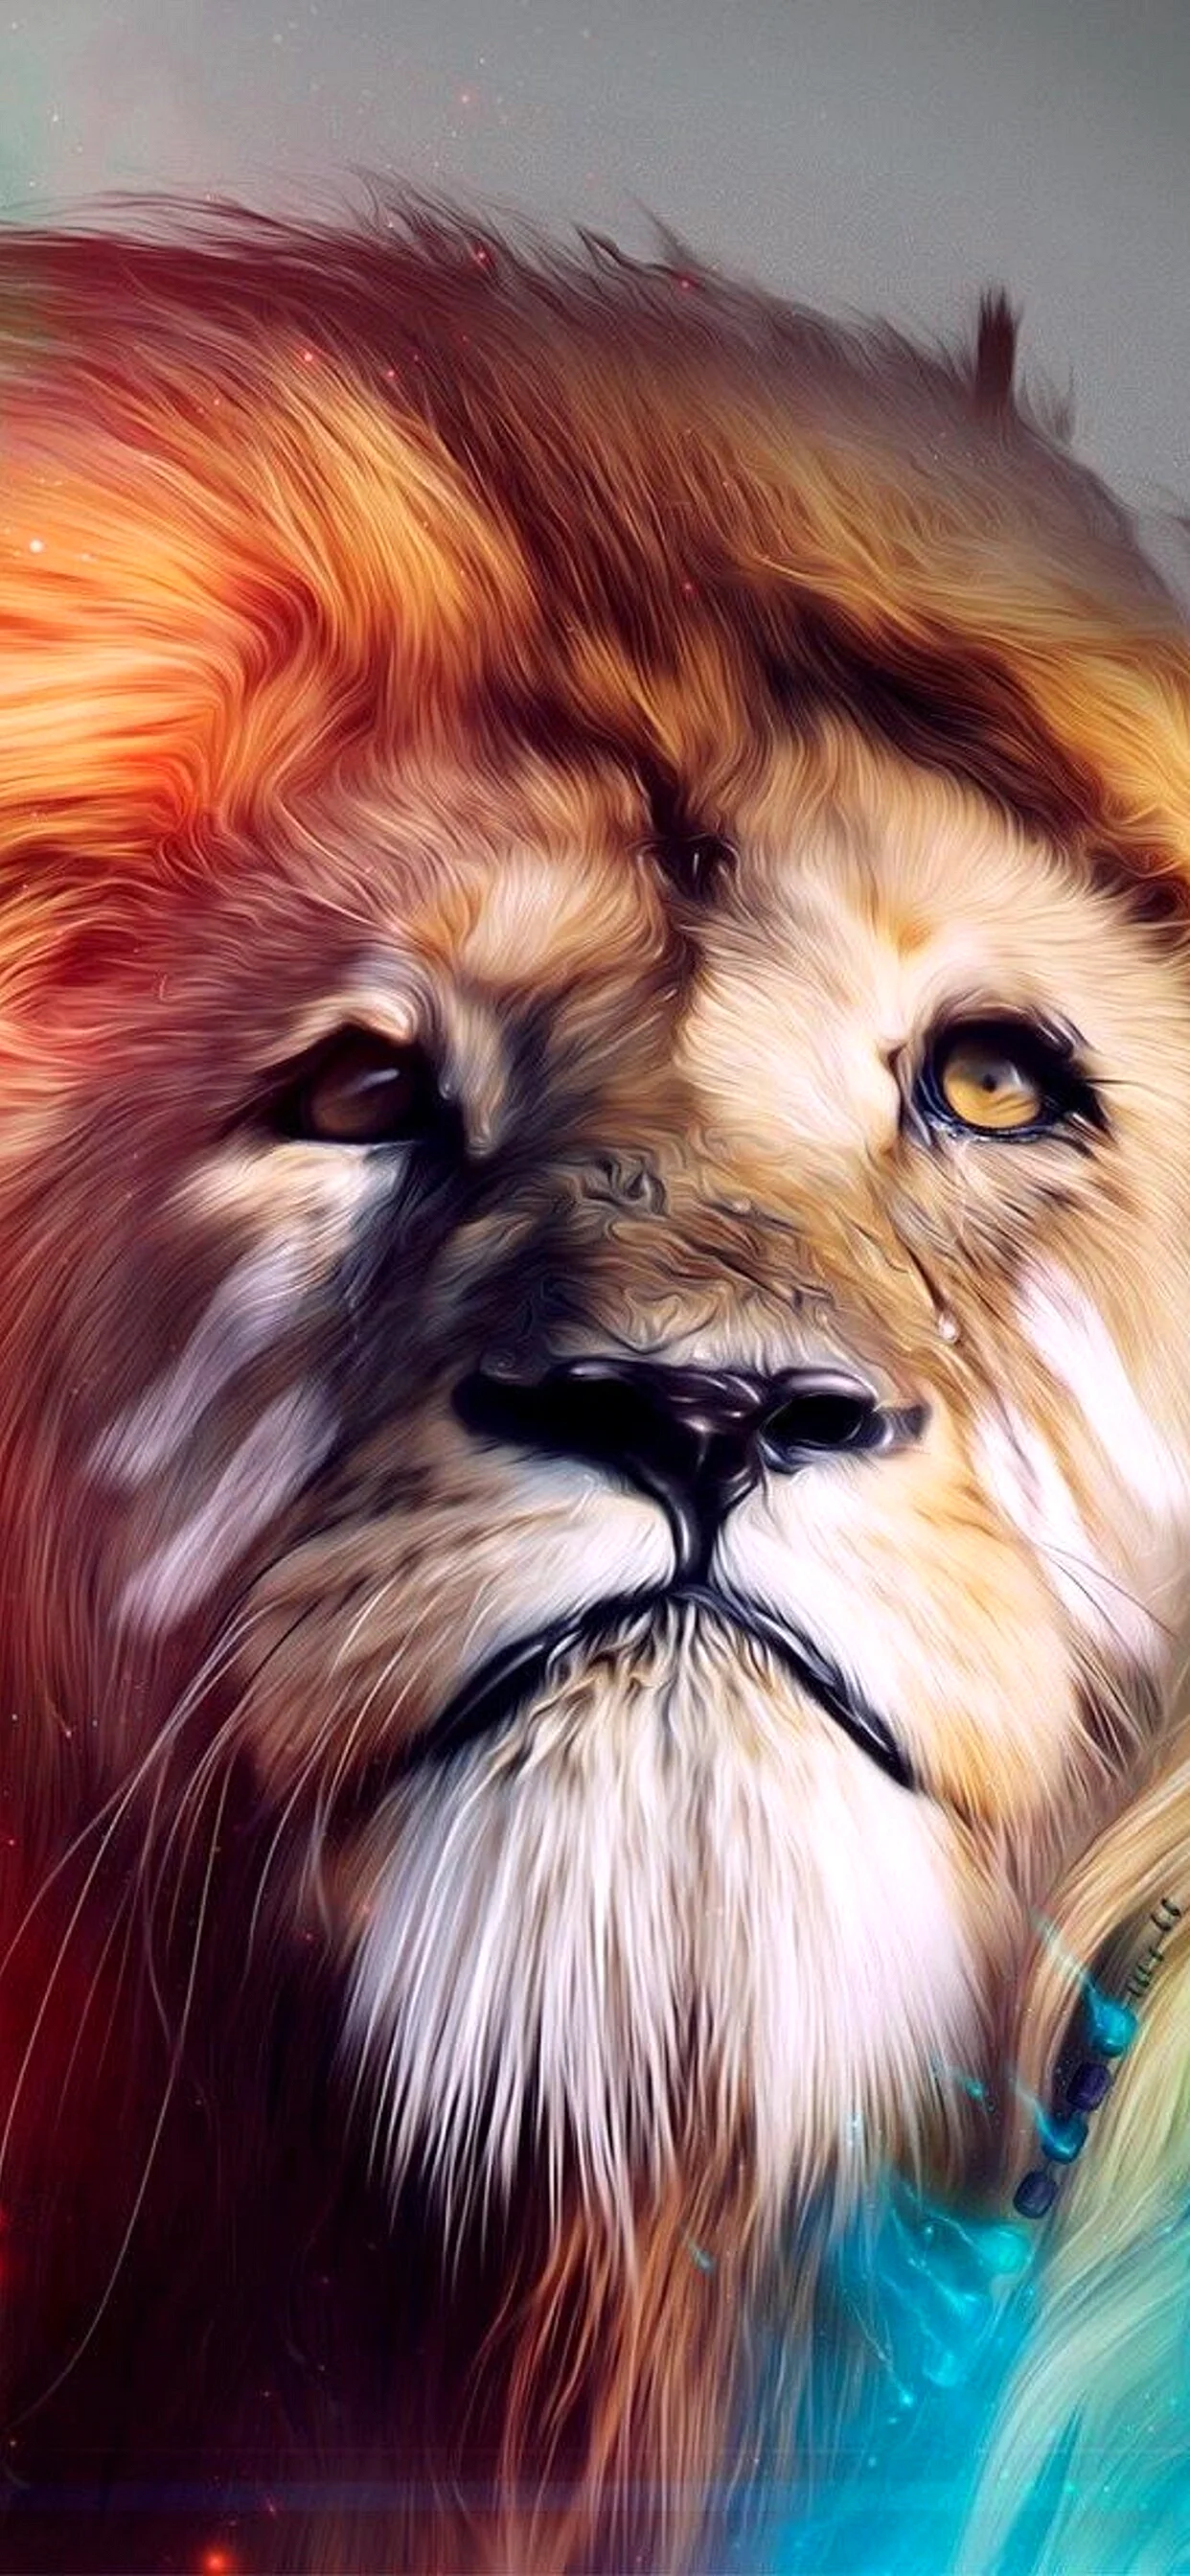 Rainbow Lion Wallpaper for iPhone 11 Pro Max